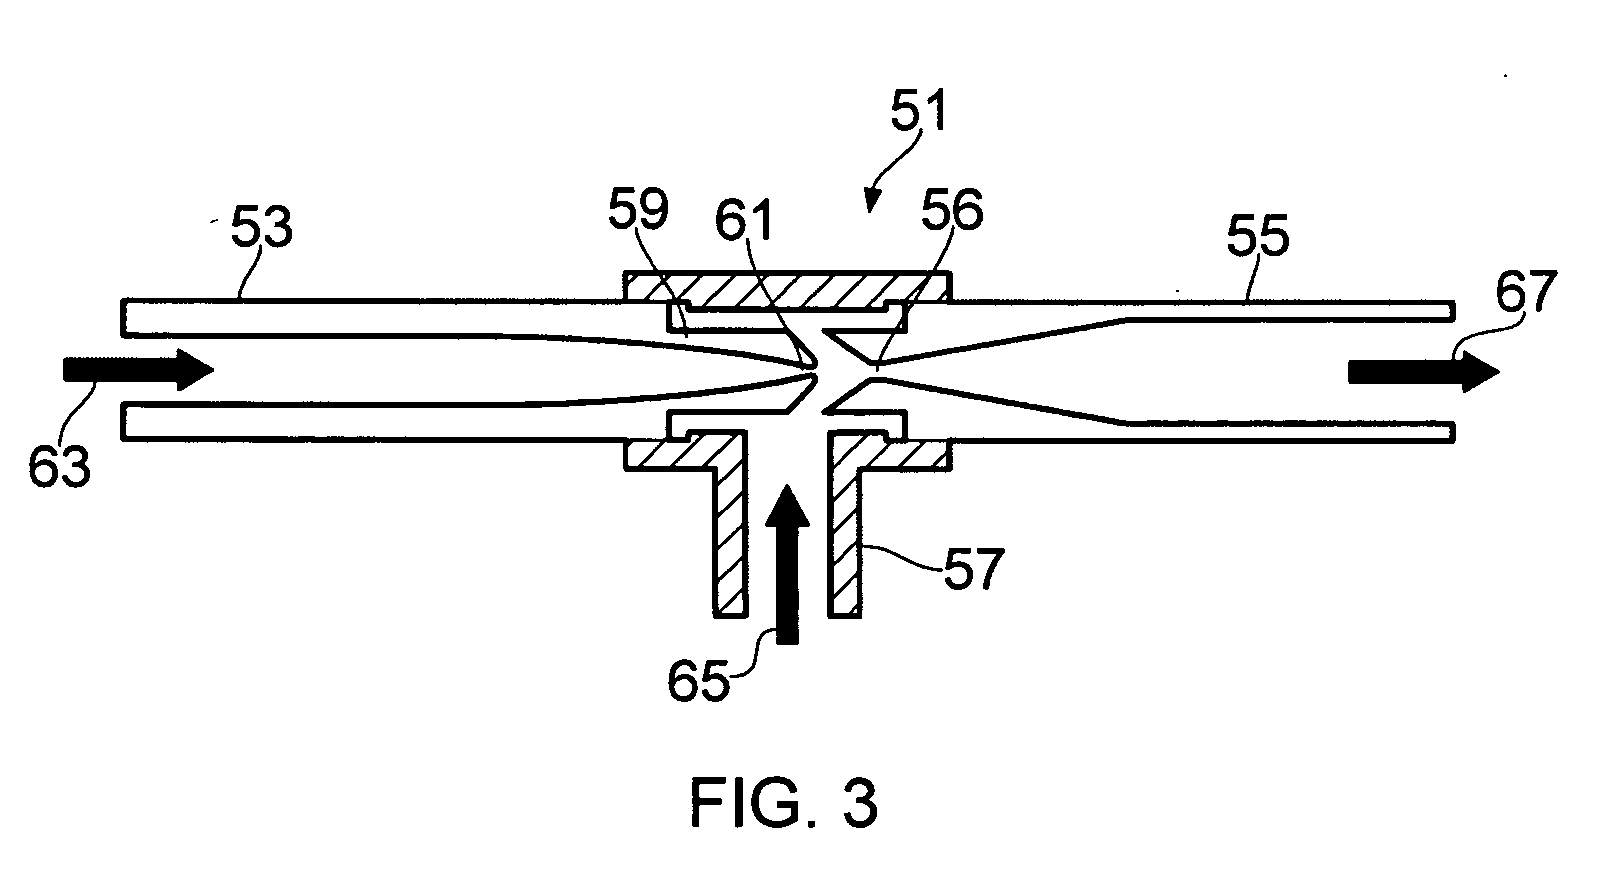 Apparatus and method for laser irradiation